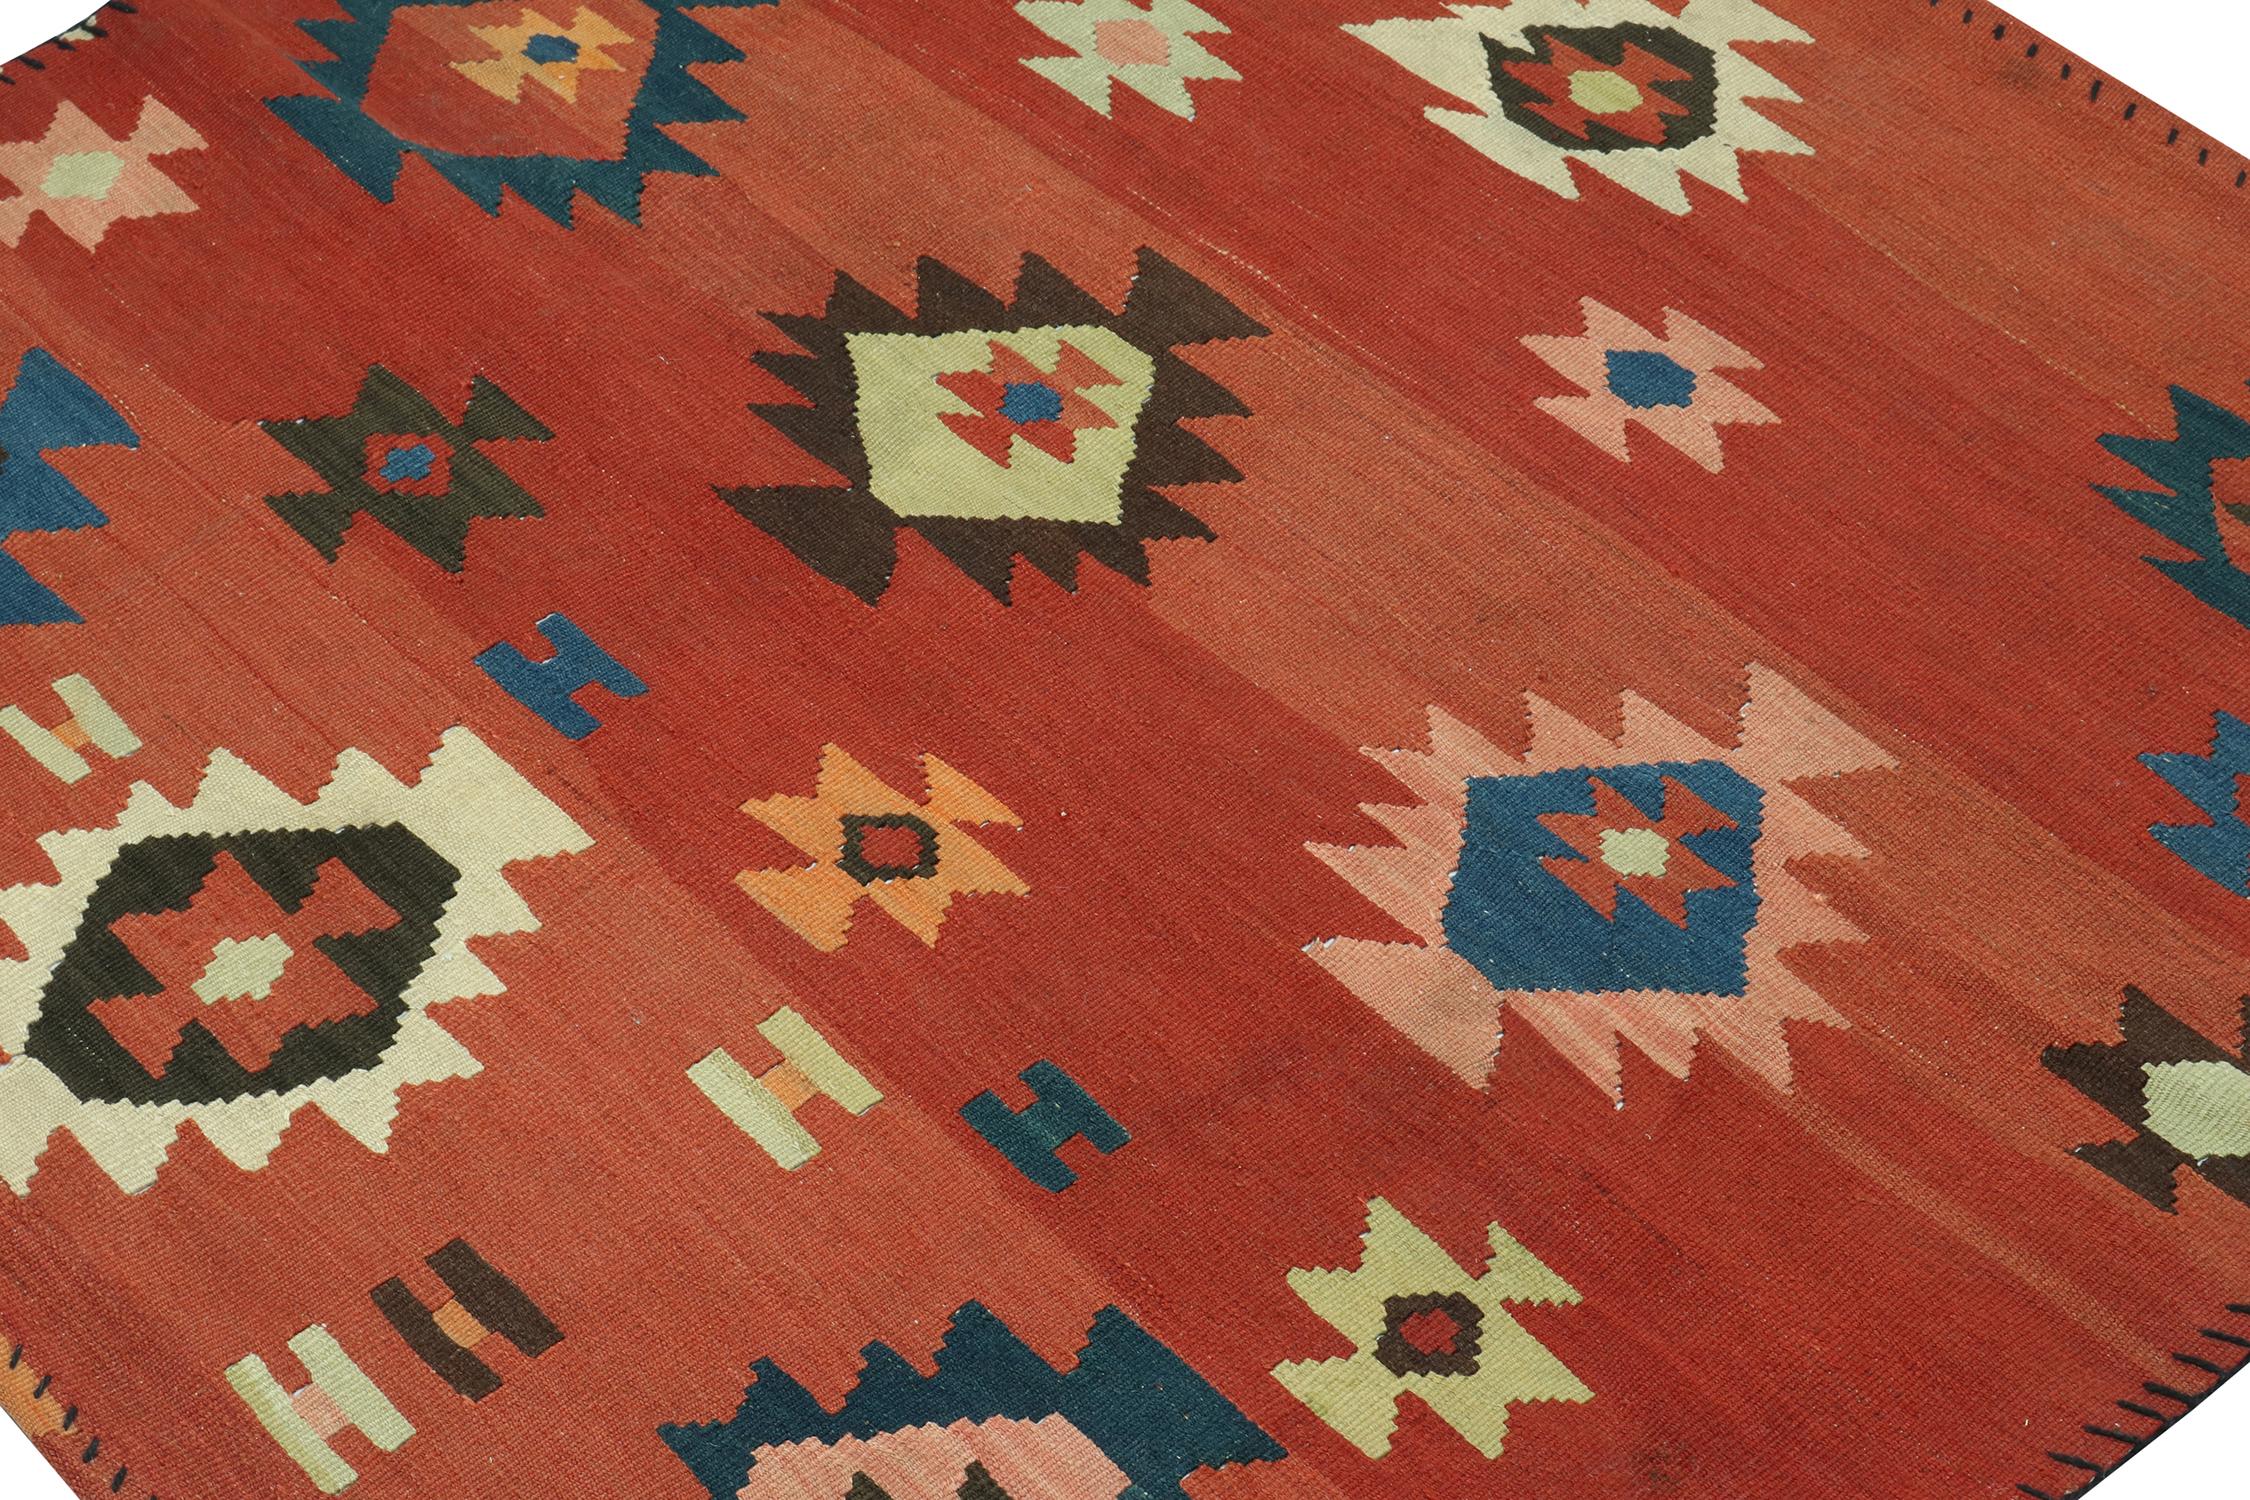 Vintage Persian Tribal Kilim rug in Red with Geometric Patterns - by Rug & Kilim In Good Condition For Sale In Long Island City, NY